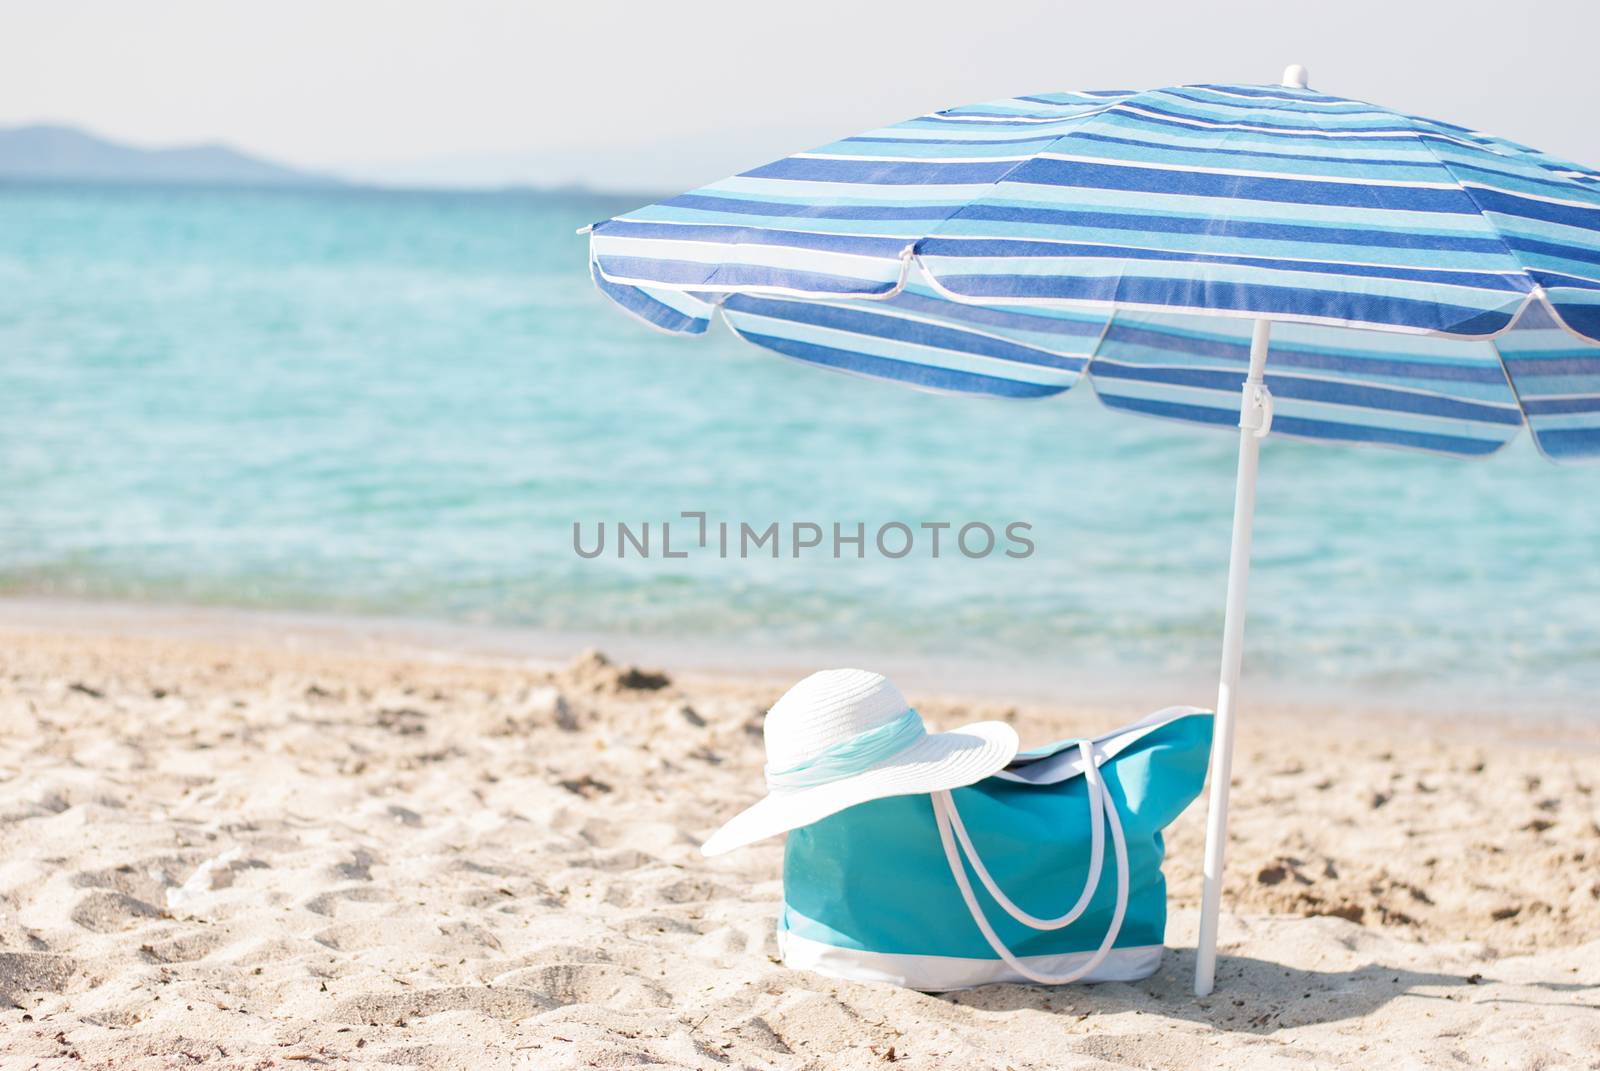 Turquoise bag and white hat on the beach.